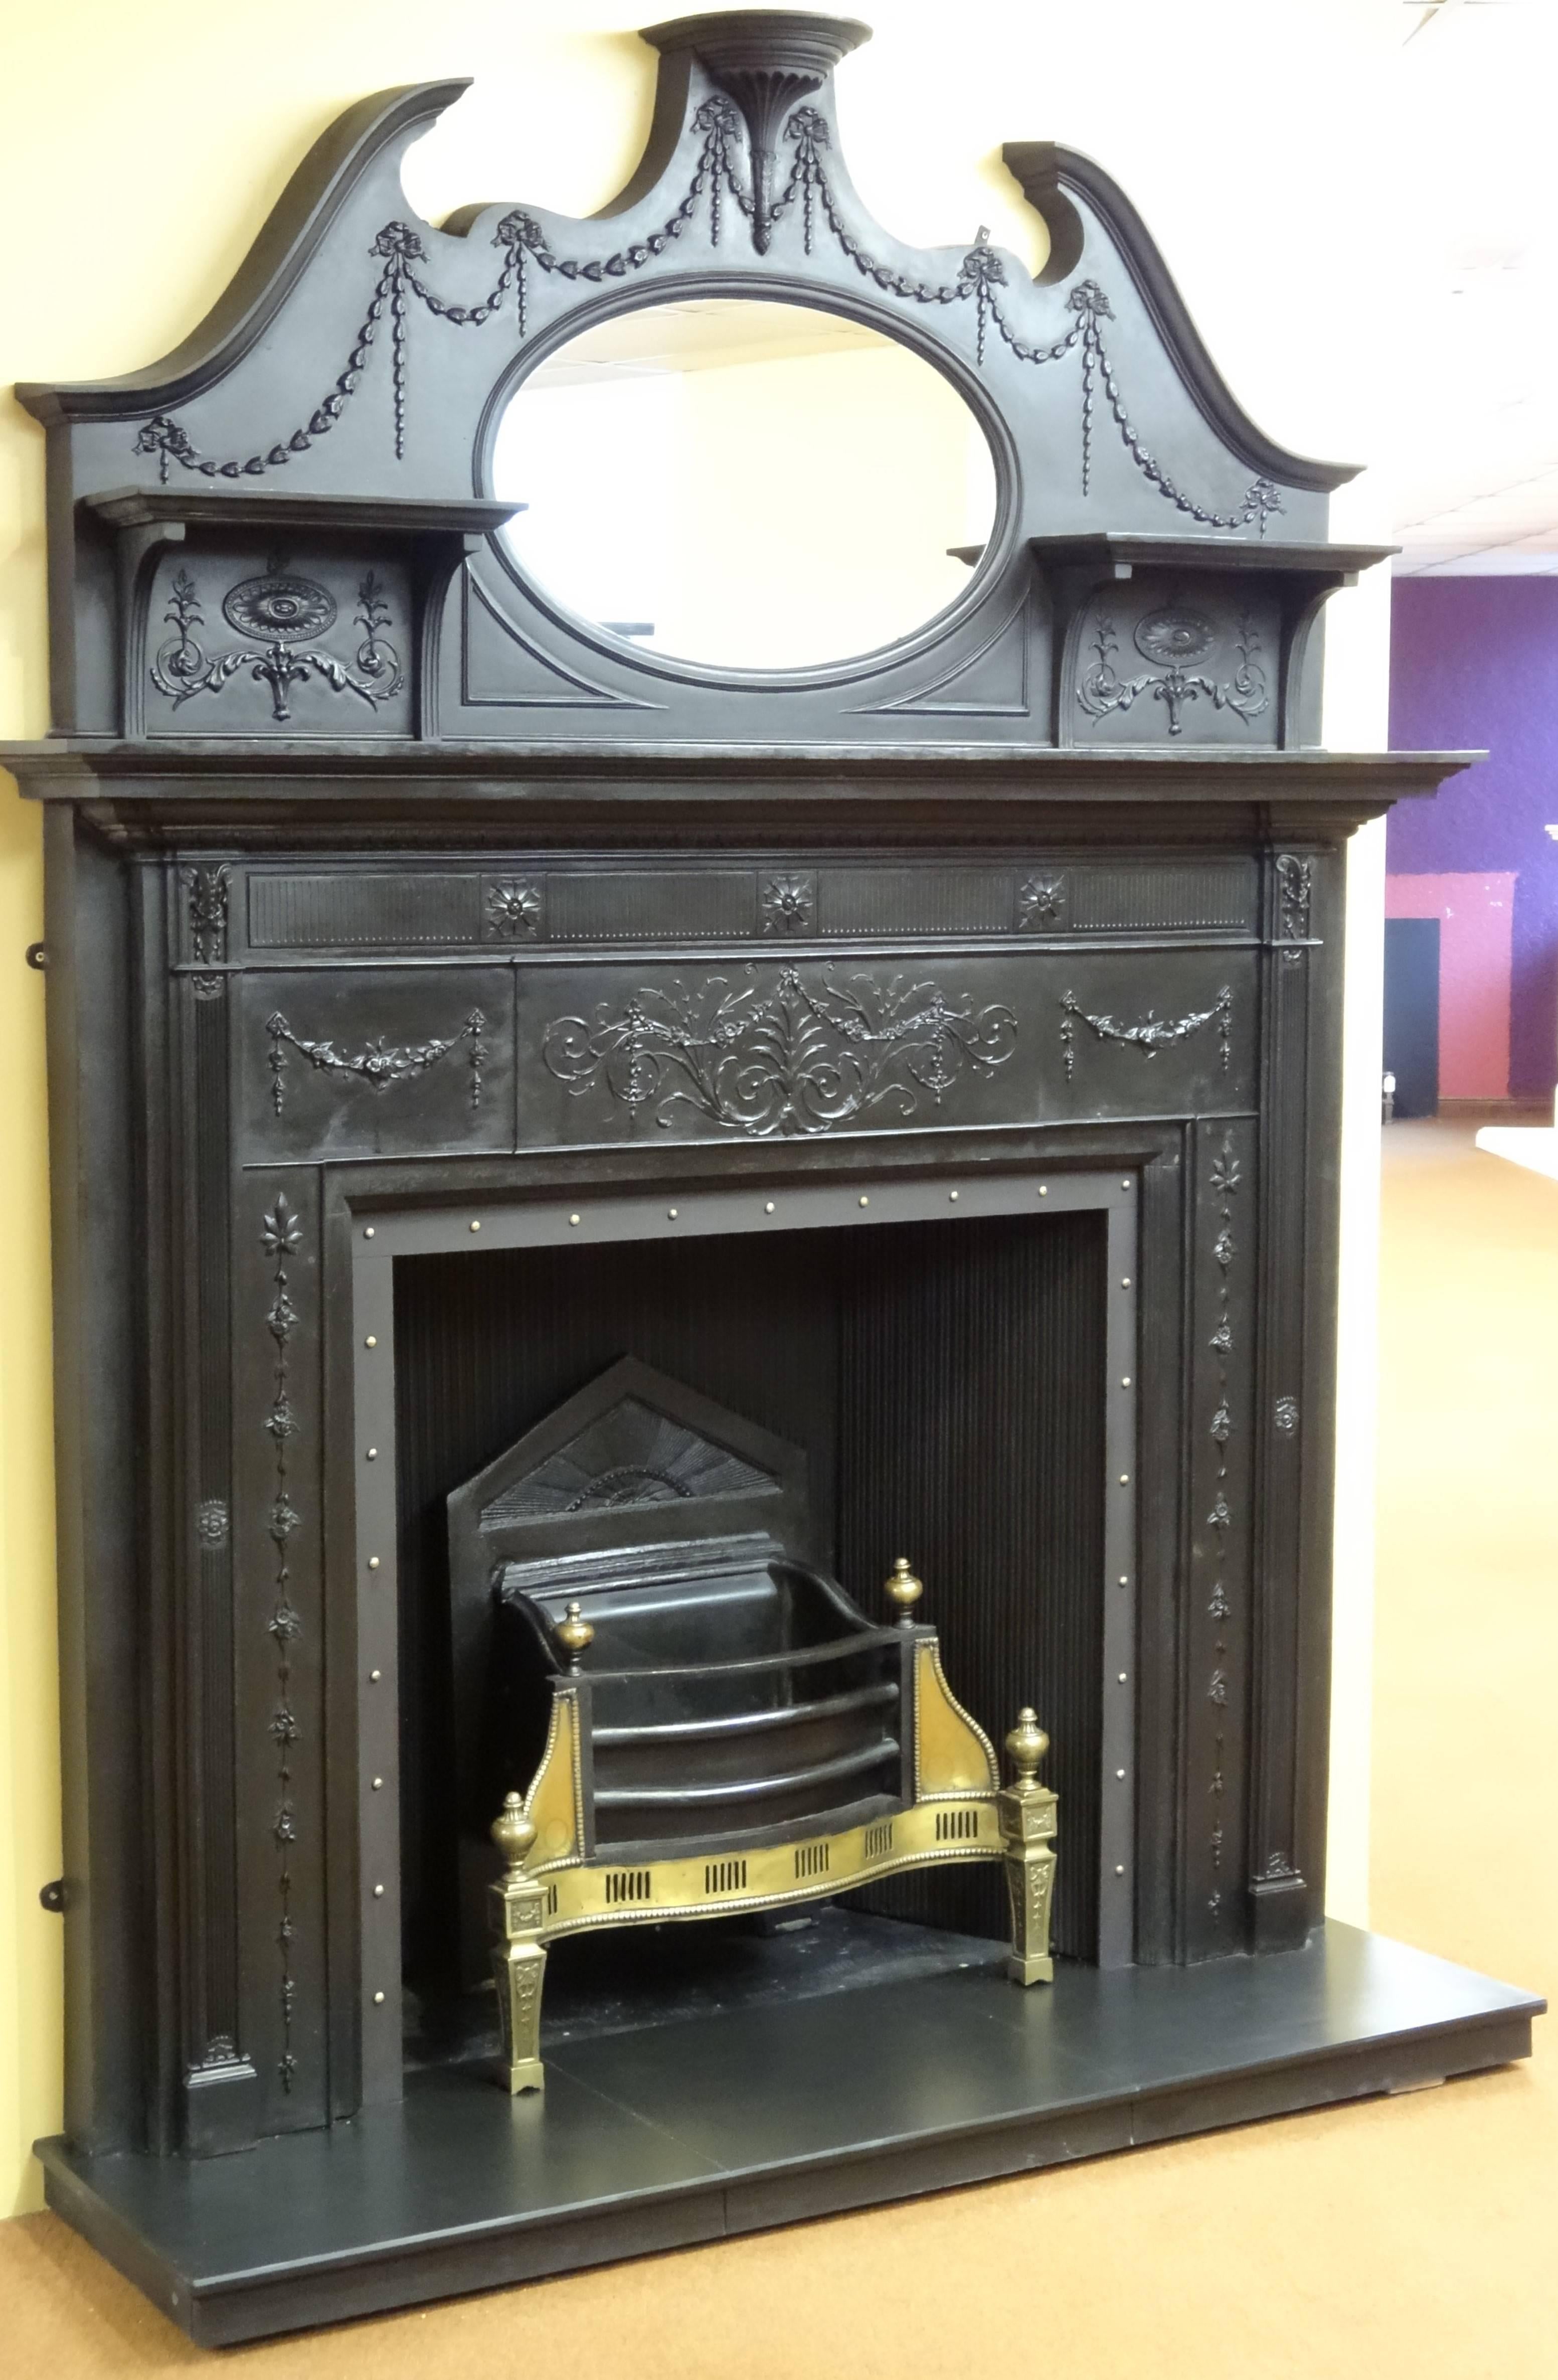 Northern Irish 19th Century Victorian Cast Iron Fire Surround with Matching Overmantel Mirror For Sale